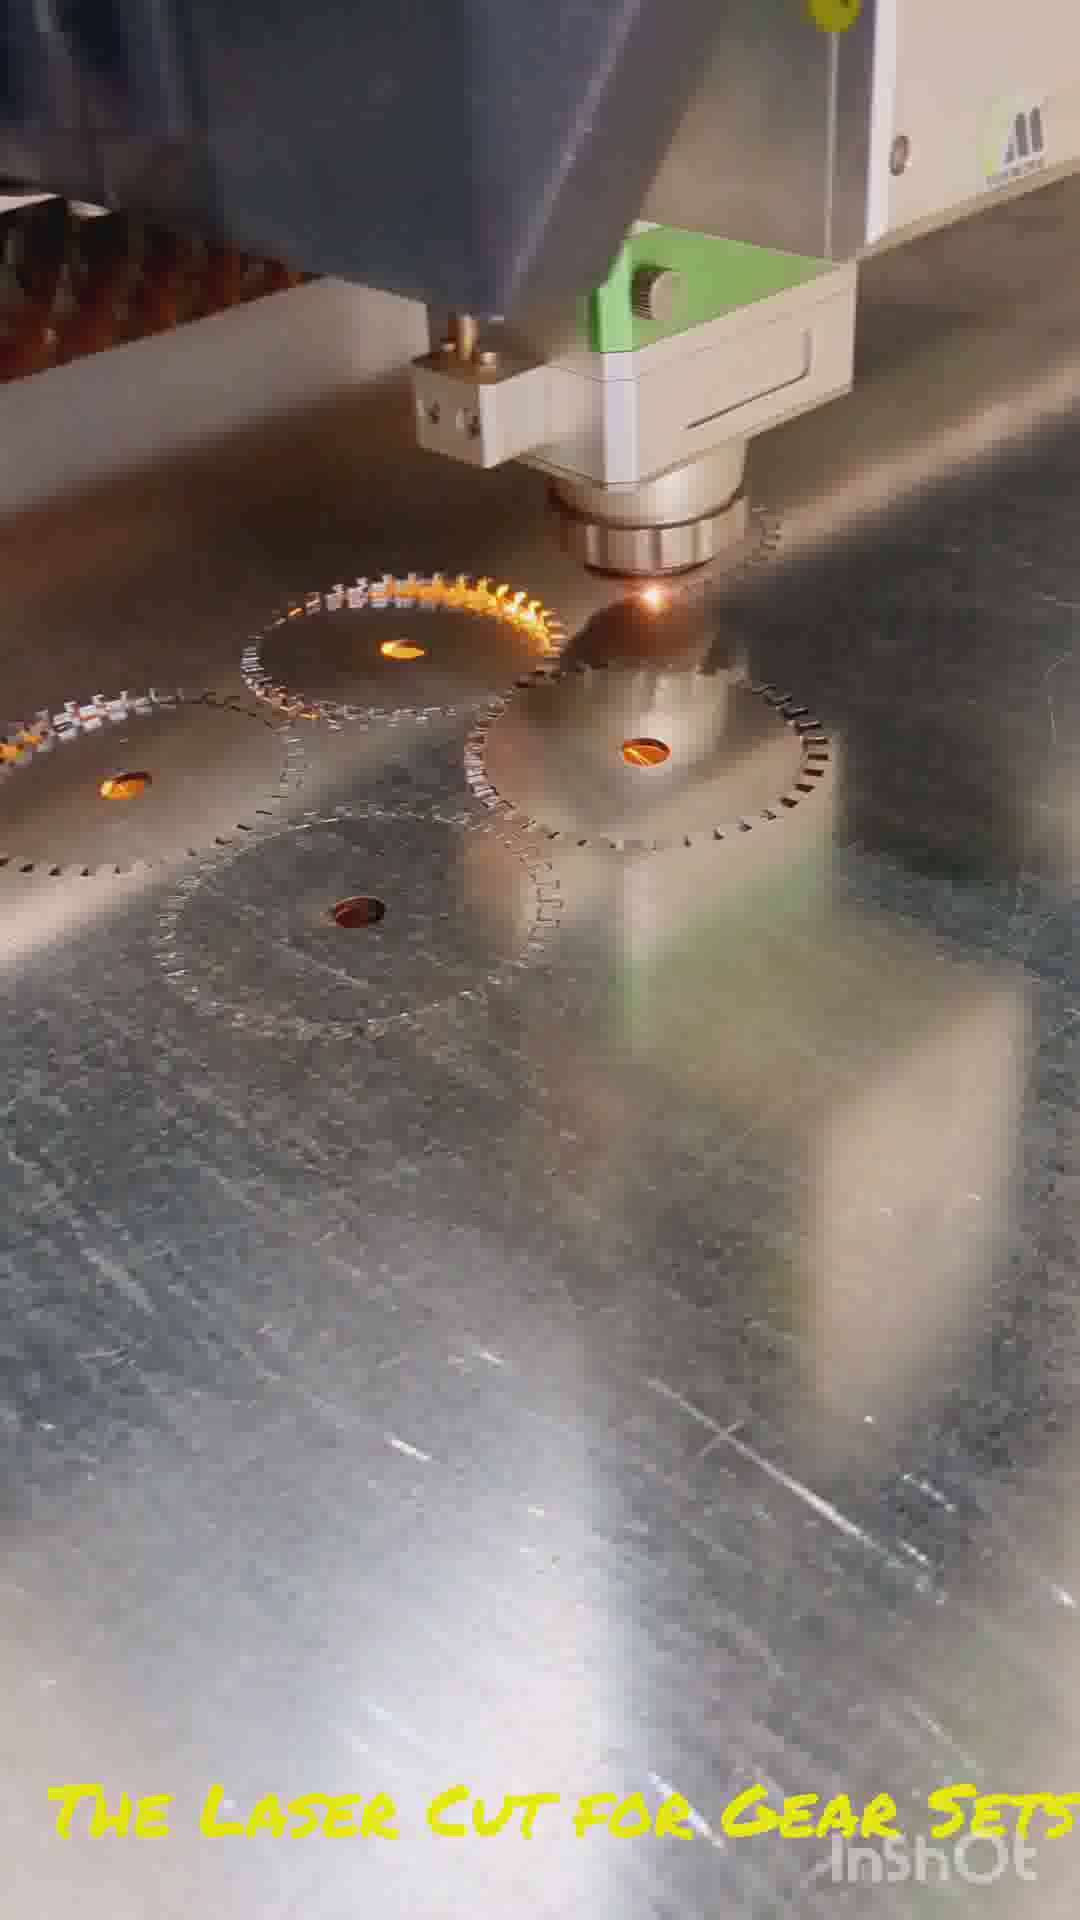 For more details on CNC Metal Cutting, pls contact +91-9741740227 #Lasercutting